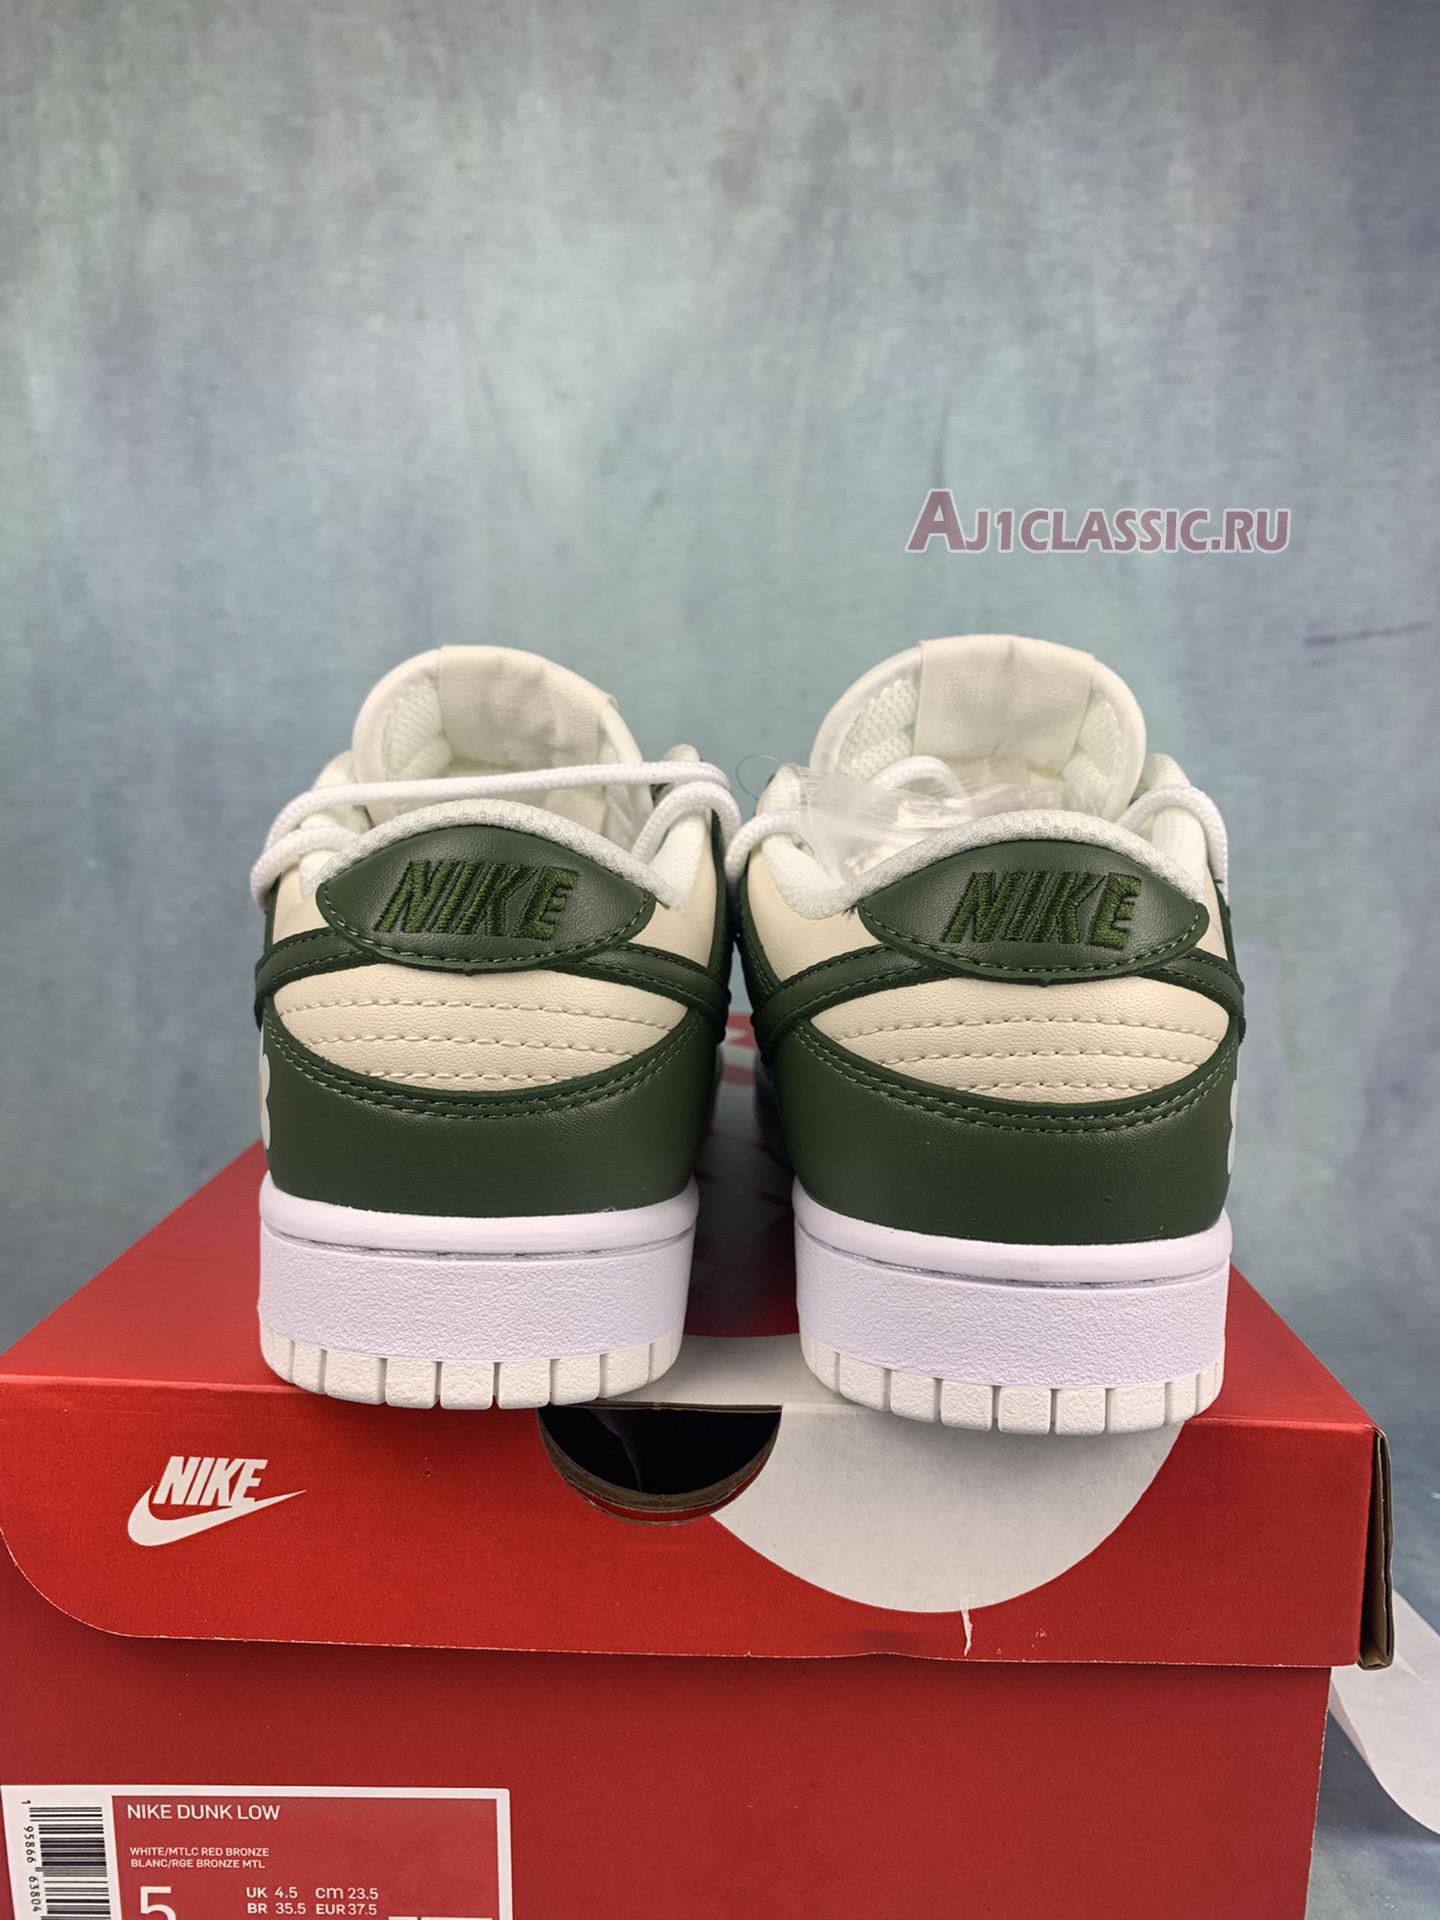 Off-White x Nike Dunk Low "Green Bloom" DH9765-100-2